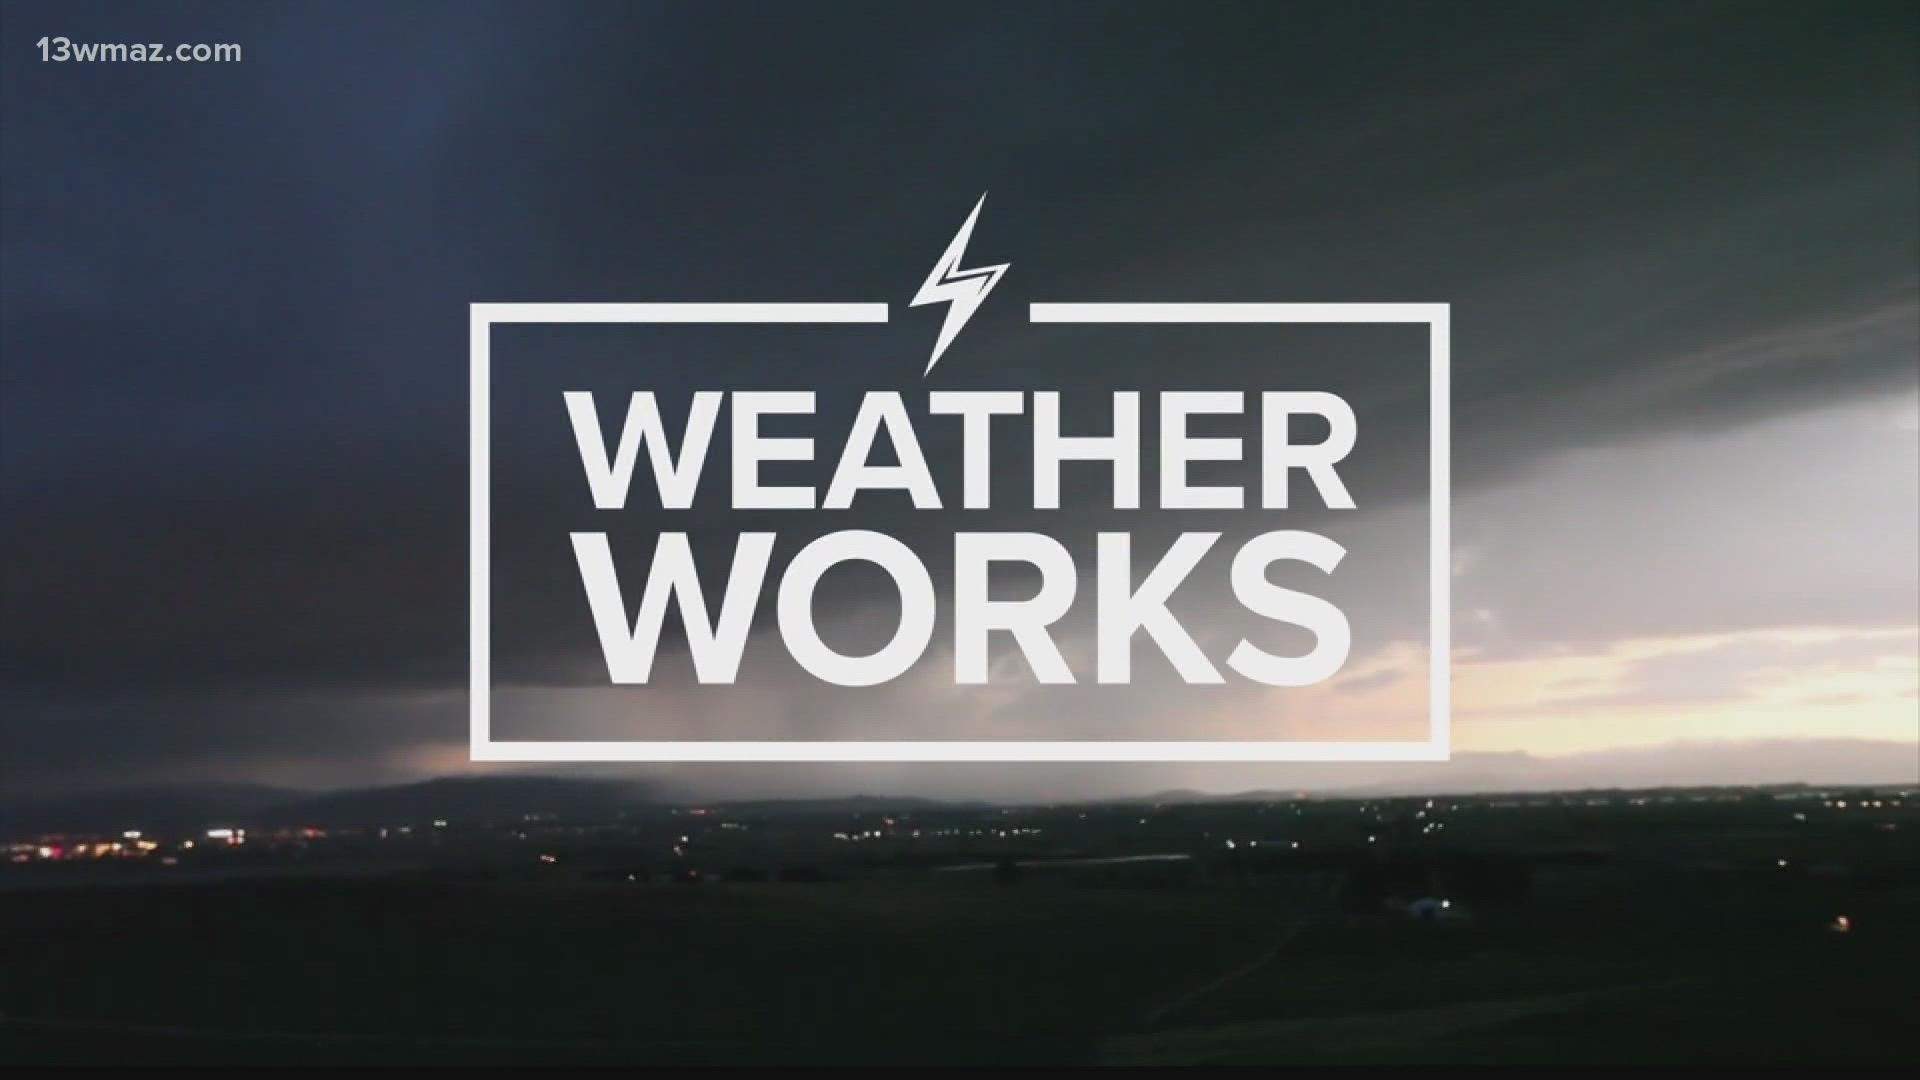 Meteorologist Taylor Stephenson explains how rip currents form and how to stay safe at the beach in this episode of "Weather Works."